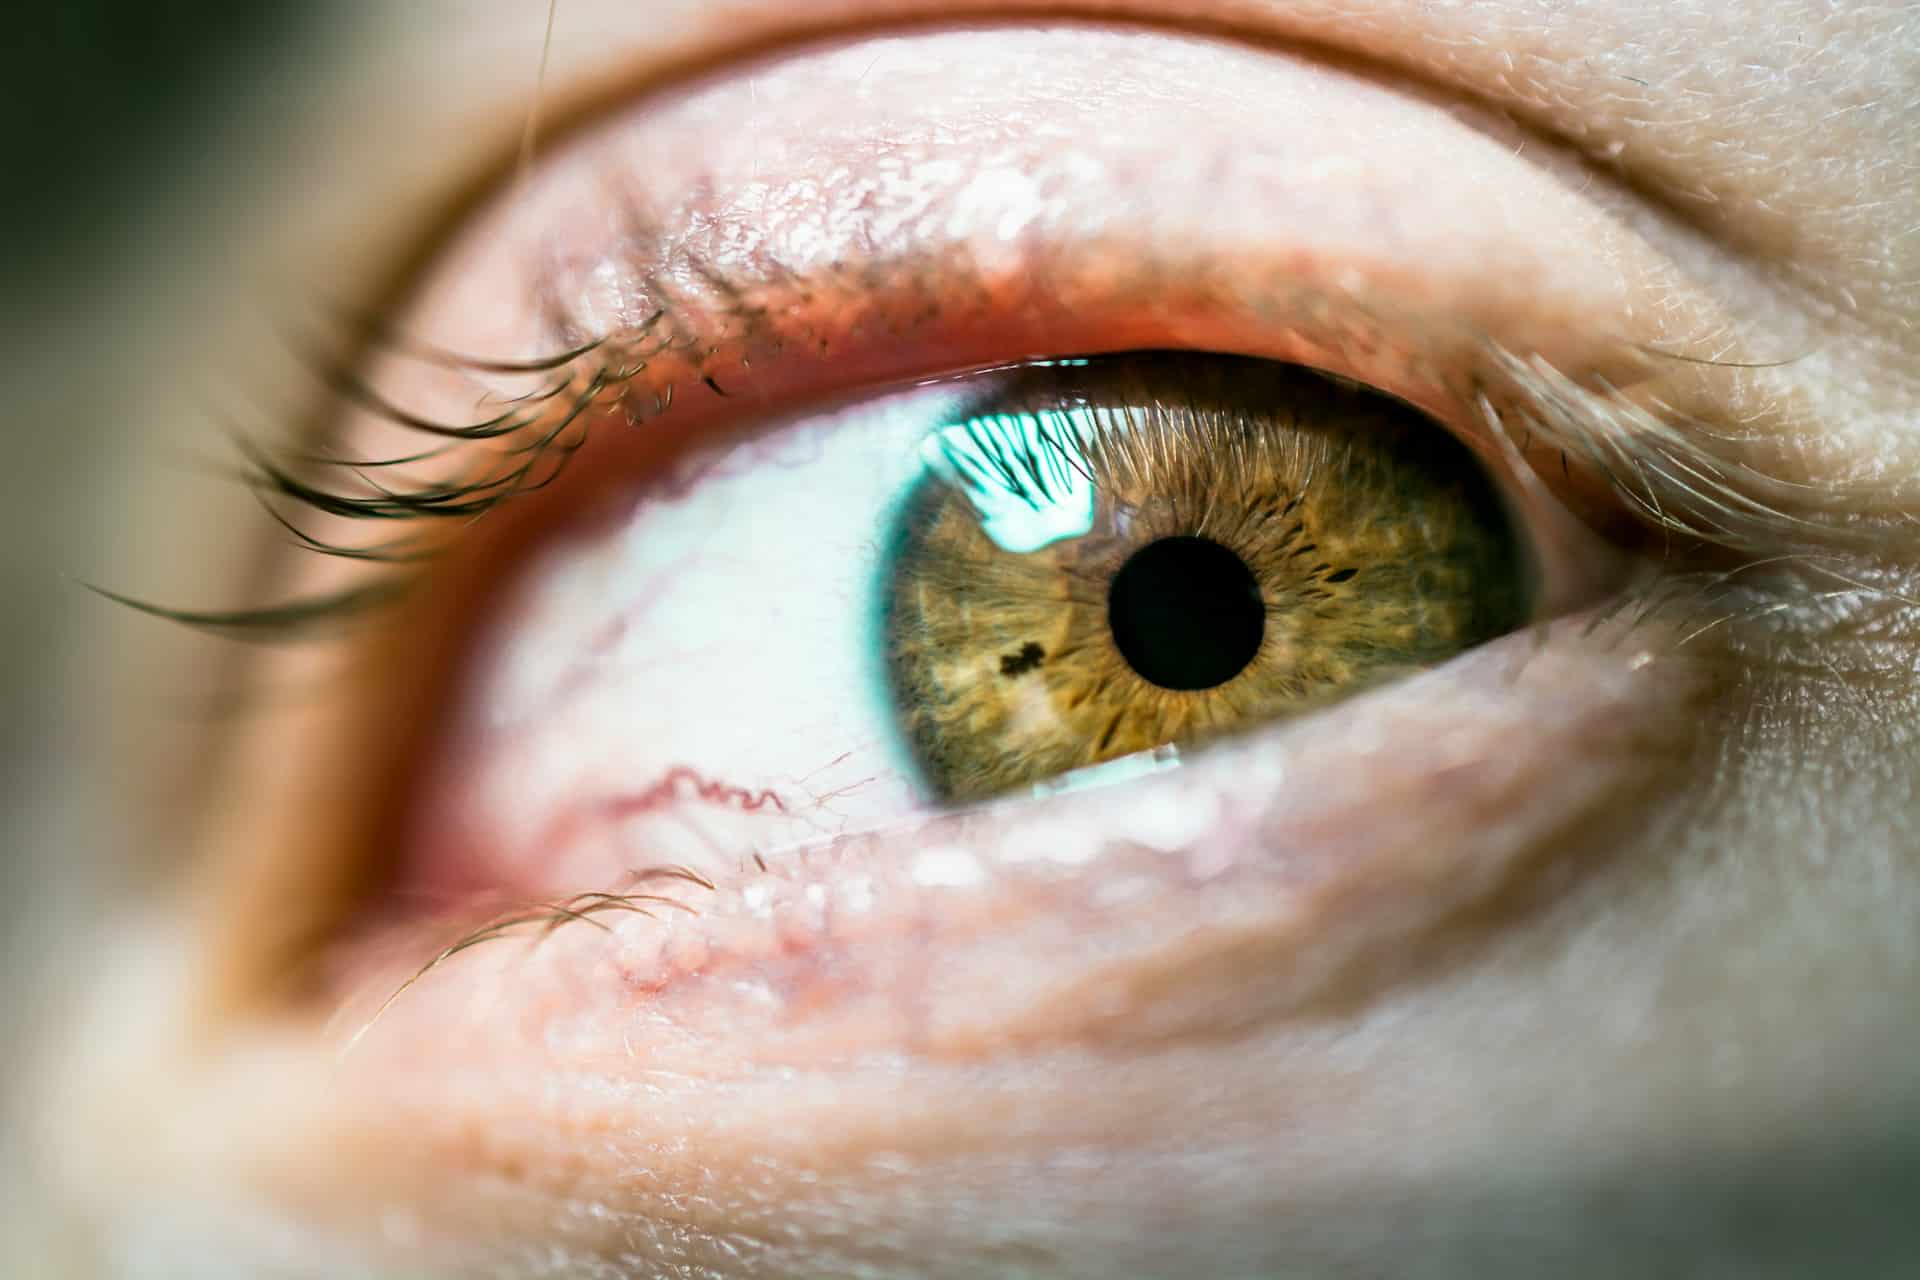 from this image we explore how long does blurred vision last after a corneal abrasion